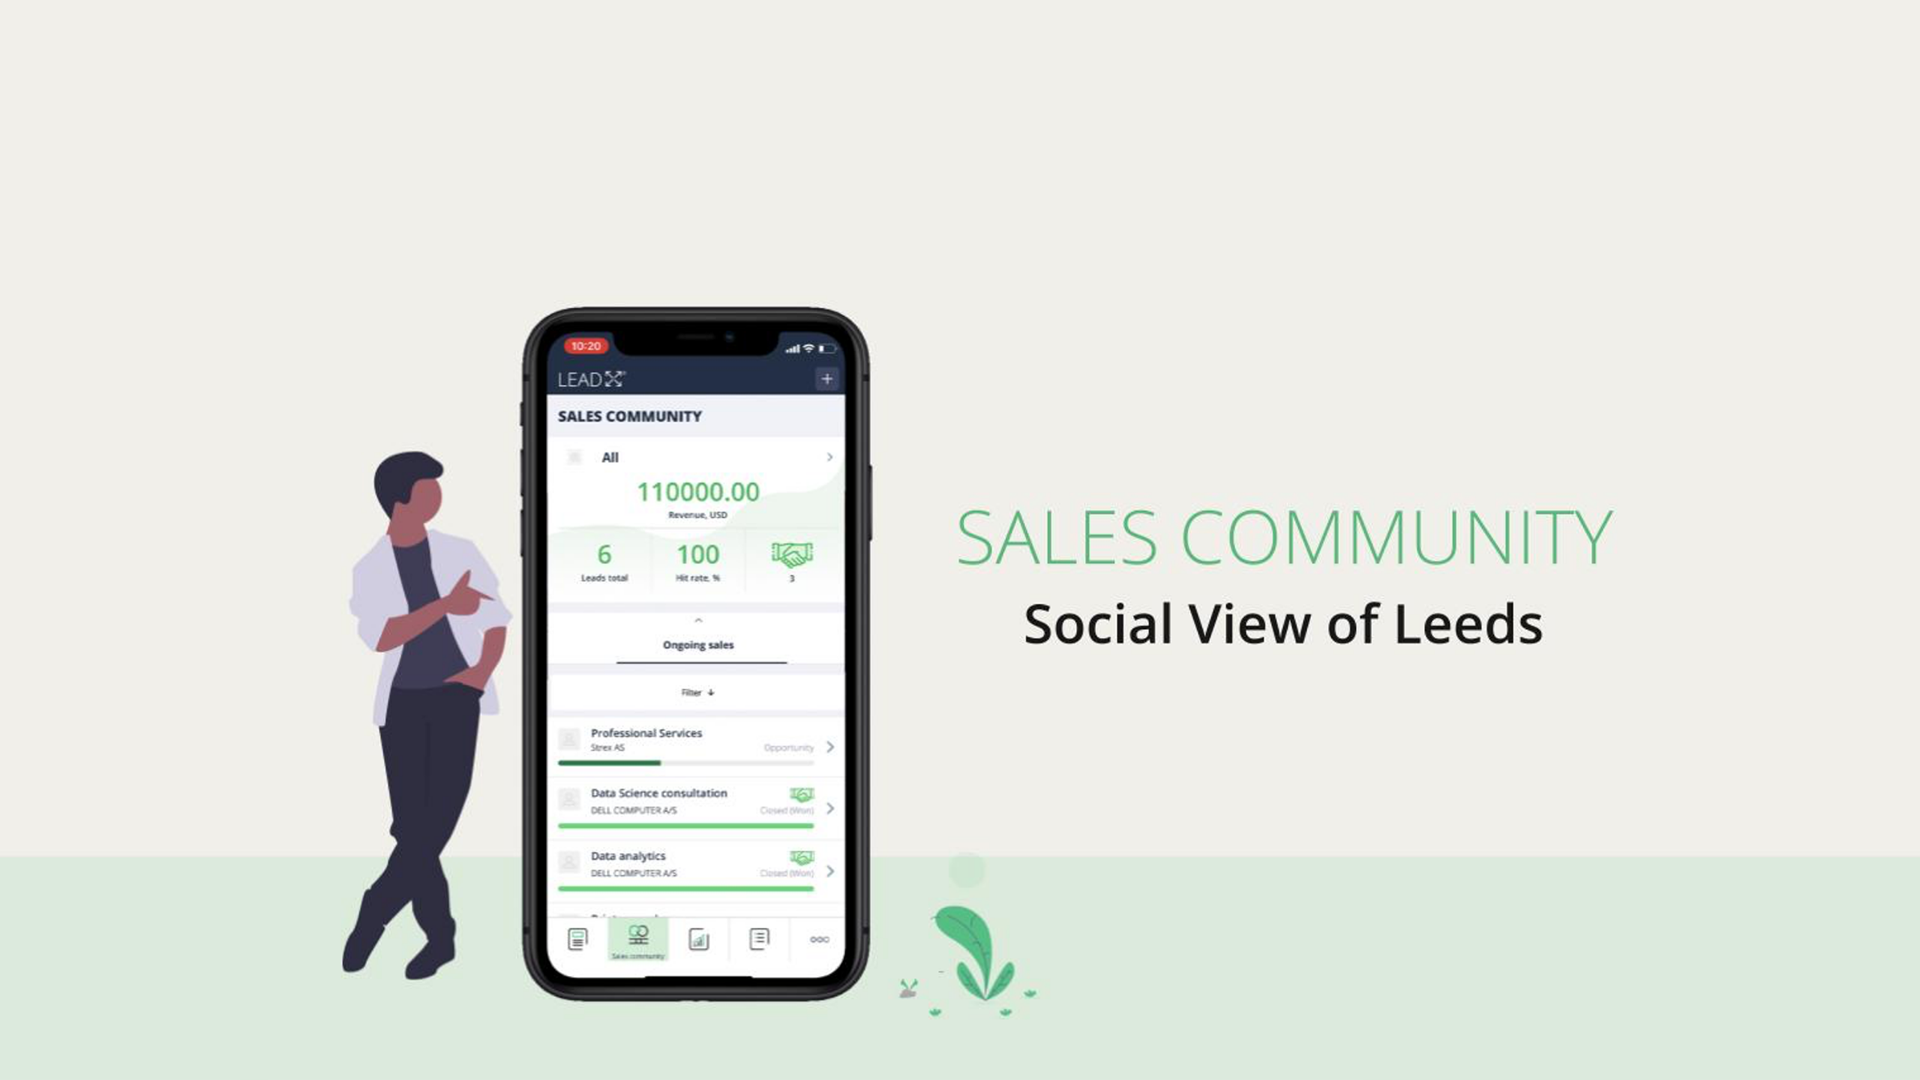 6. Overview of the sales community